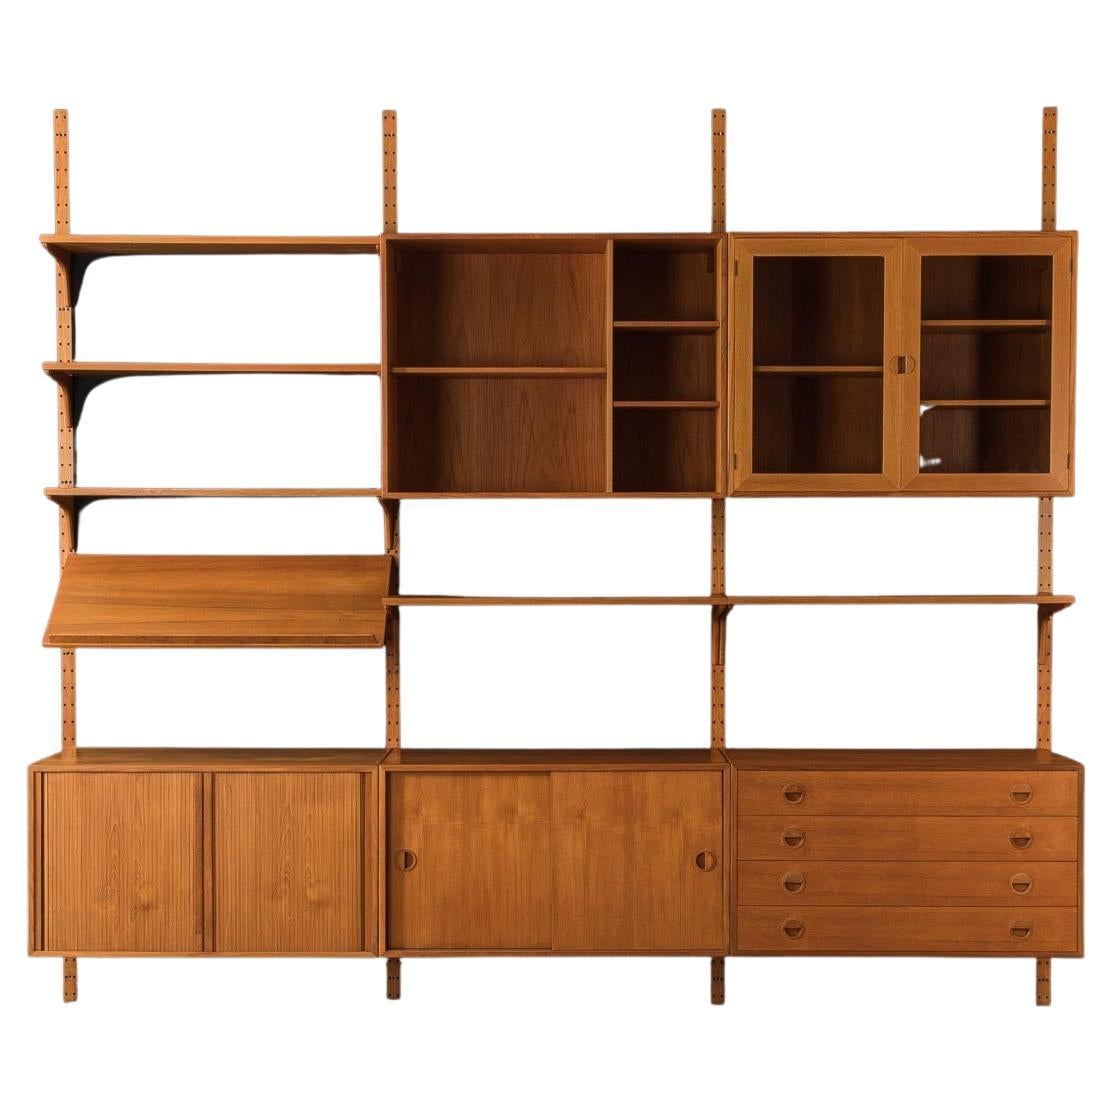 60s Wall Shelving System by HG Furniture, with Showcase, Magazine Rack, Drawers